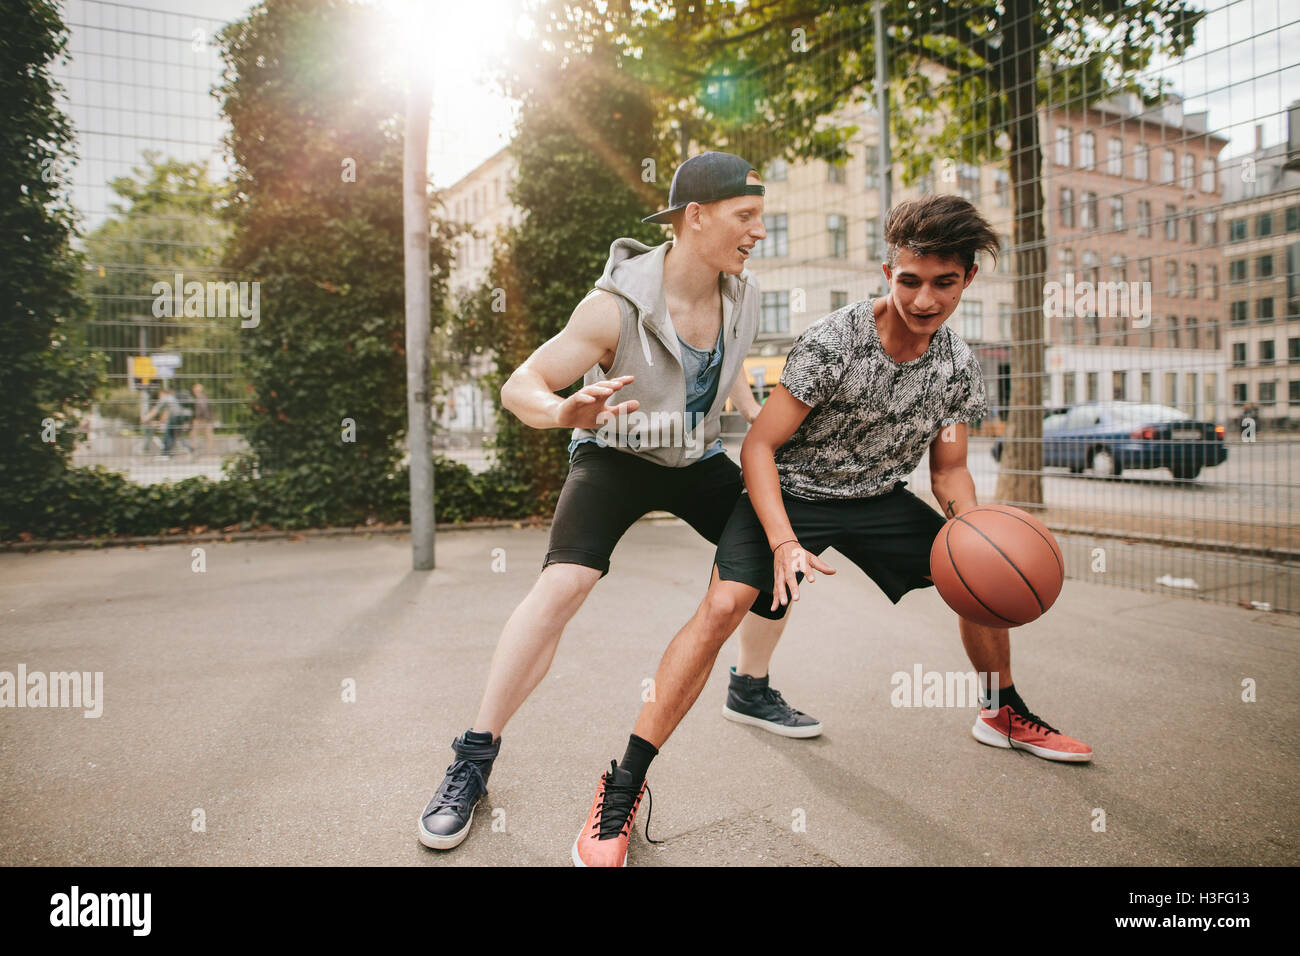 Teenagers playing basketball on outdoor court and having fun. Young man dribbling basketball with friend blocking. Streetball ga Stock Photo